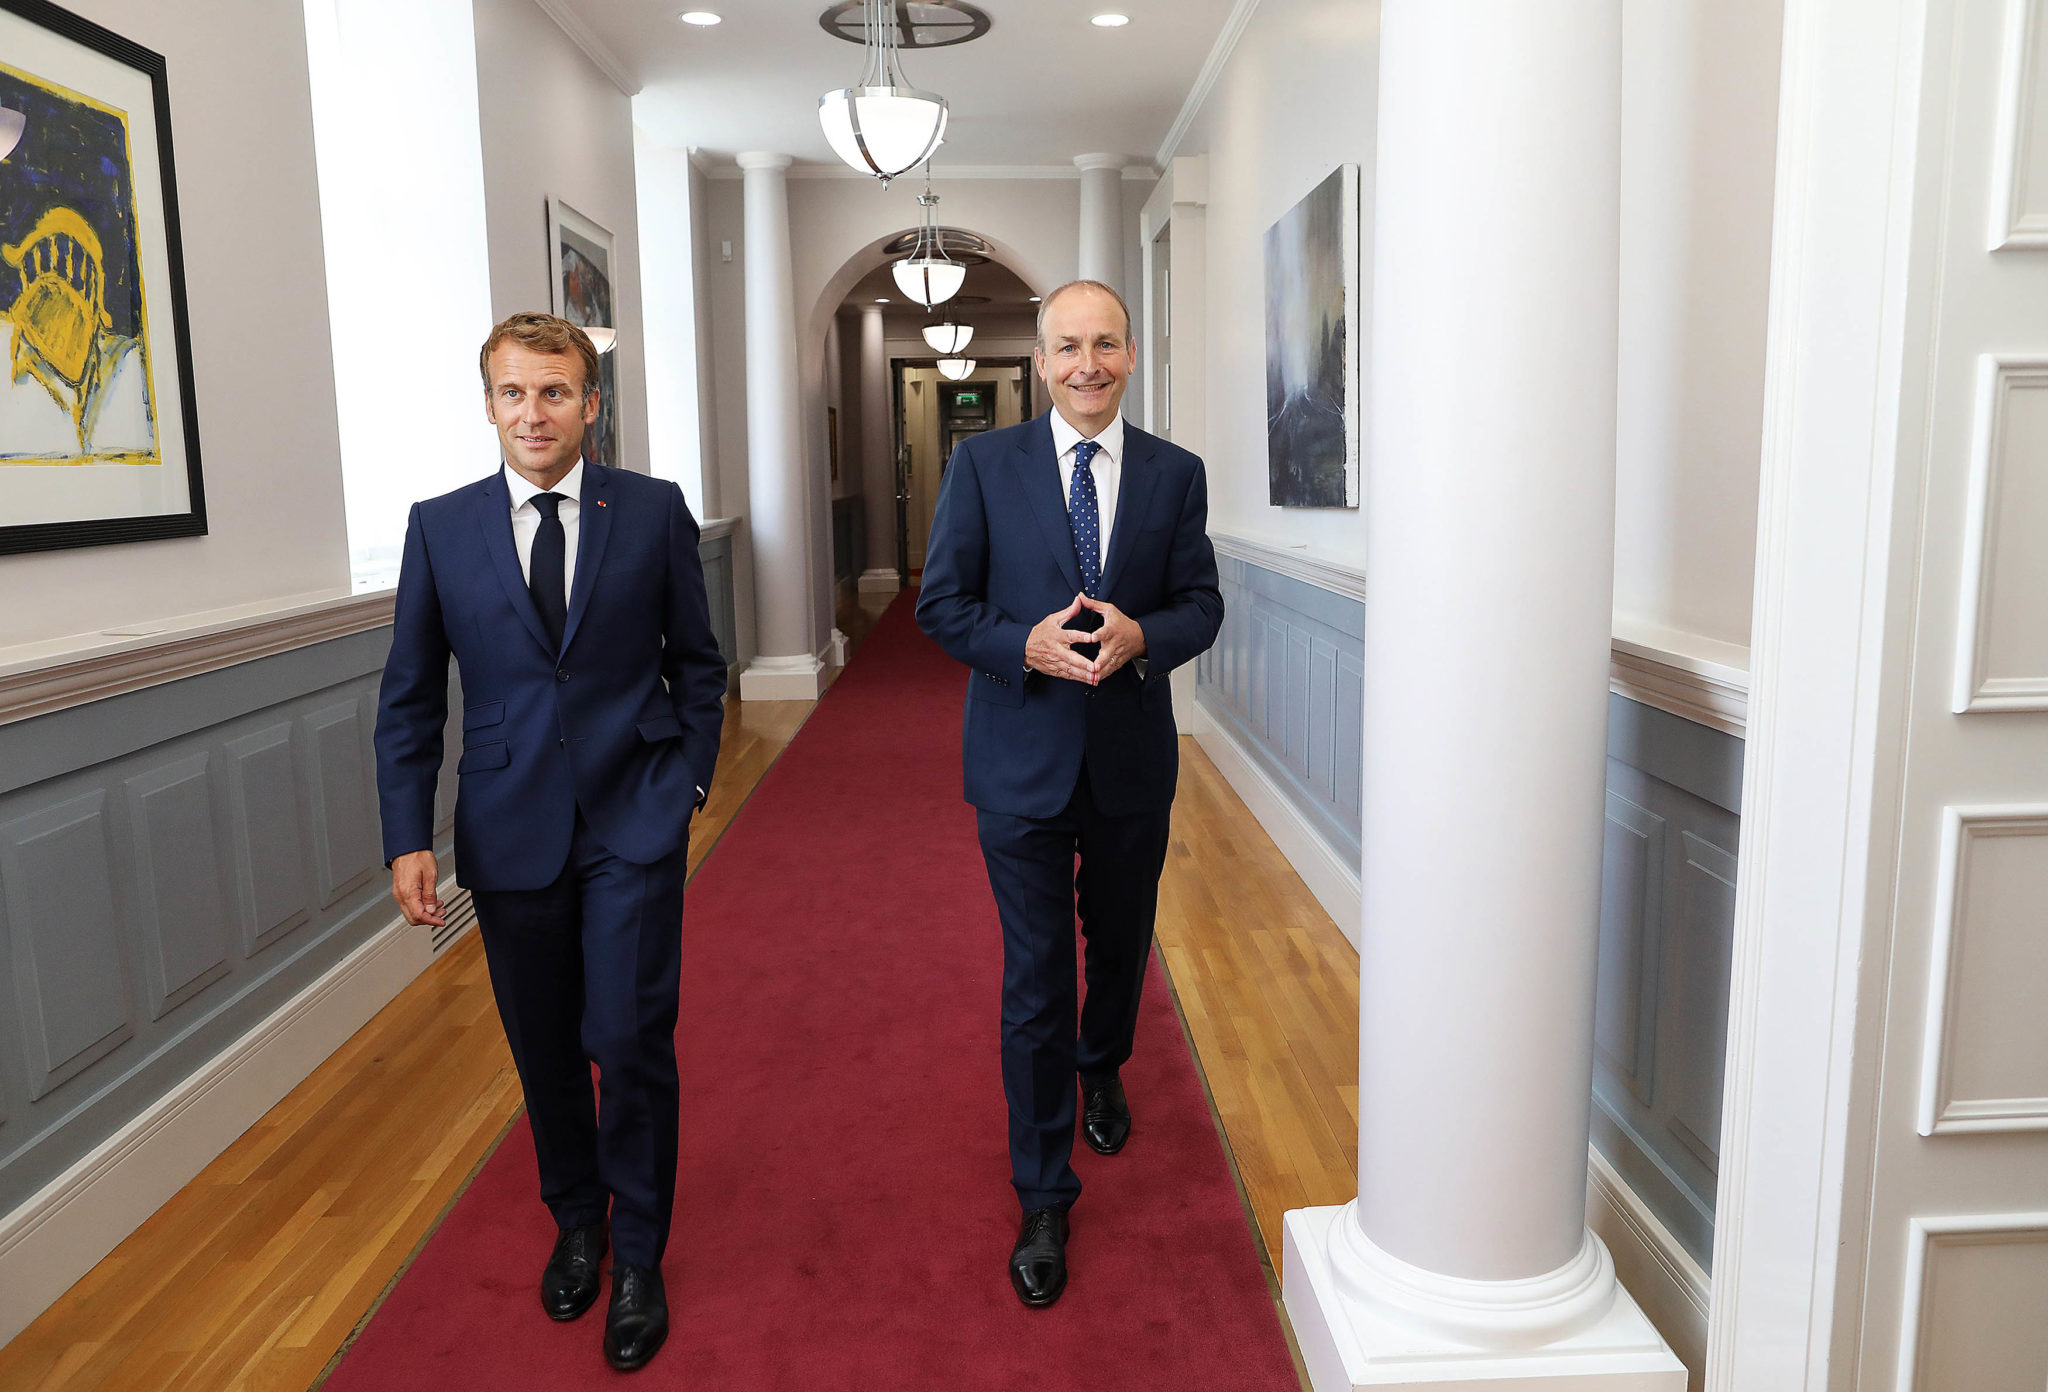 French President Emmanuel Macron with the Taoiseach Micheál Martin at Government Buildings, 26-08-2021